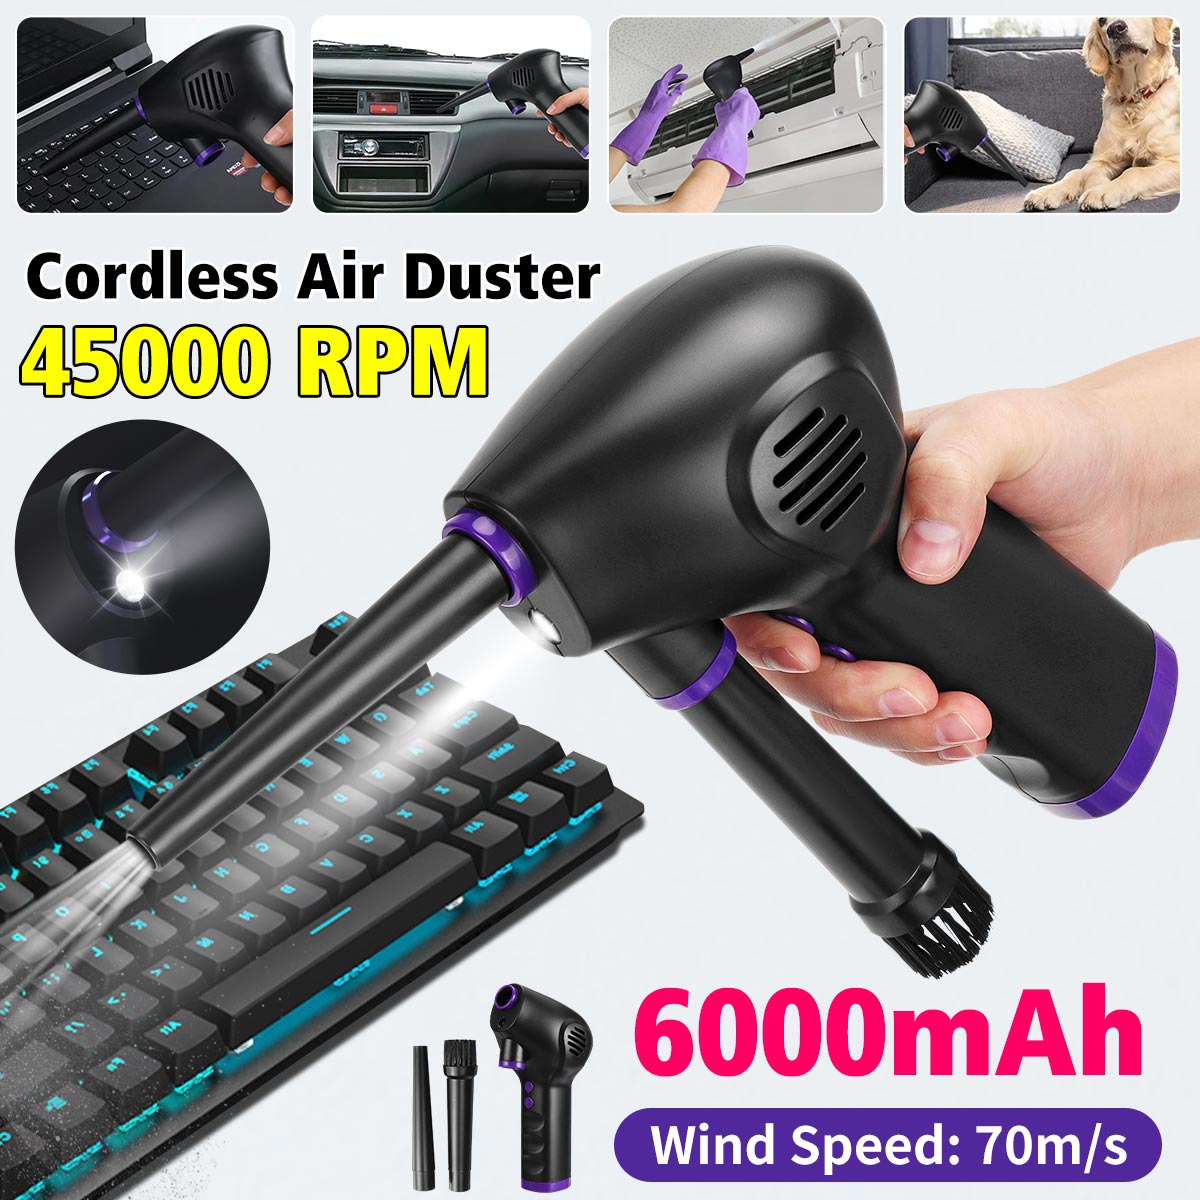 6000mAh-70ms-Cordless-Air-Duster-For-Computer-Cleaning-Replaces-Compressed-Spray-Gas-Cans-Rechargeab-1902465-2